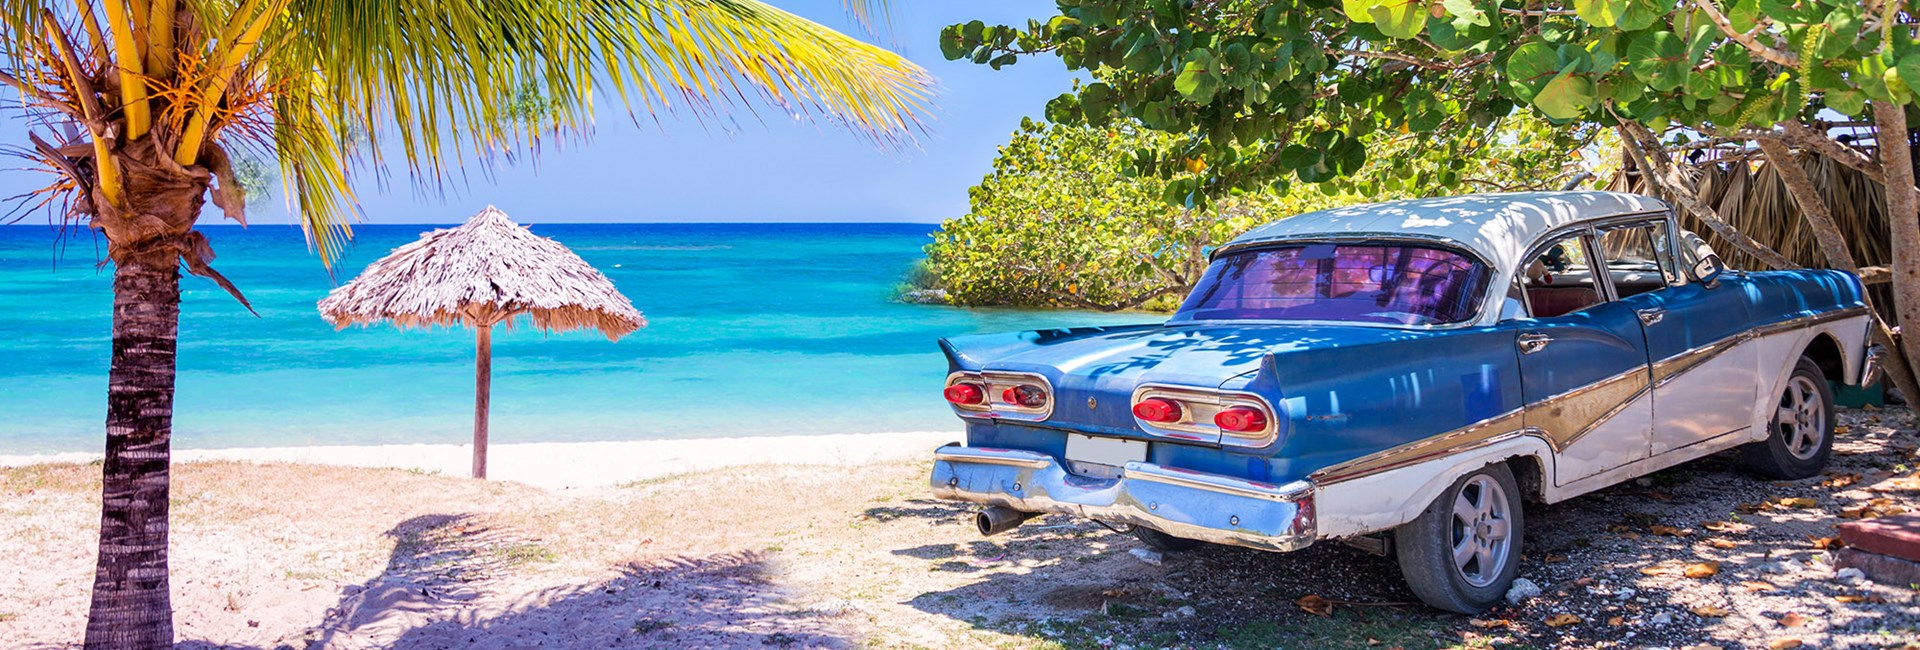 Vintage American blue car parked next to a palm tree on a white sand beach